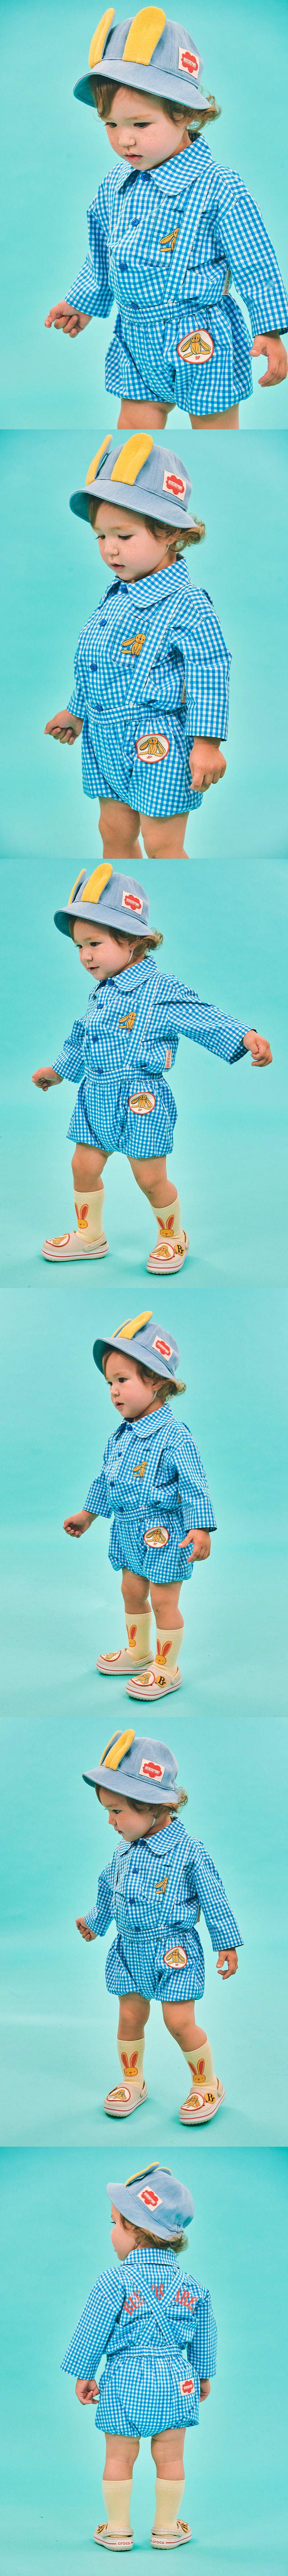 Little lotti baby check suspender with bloomer 상세 이미지